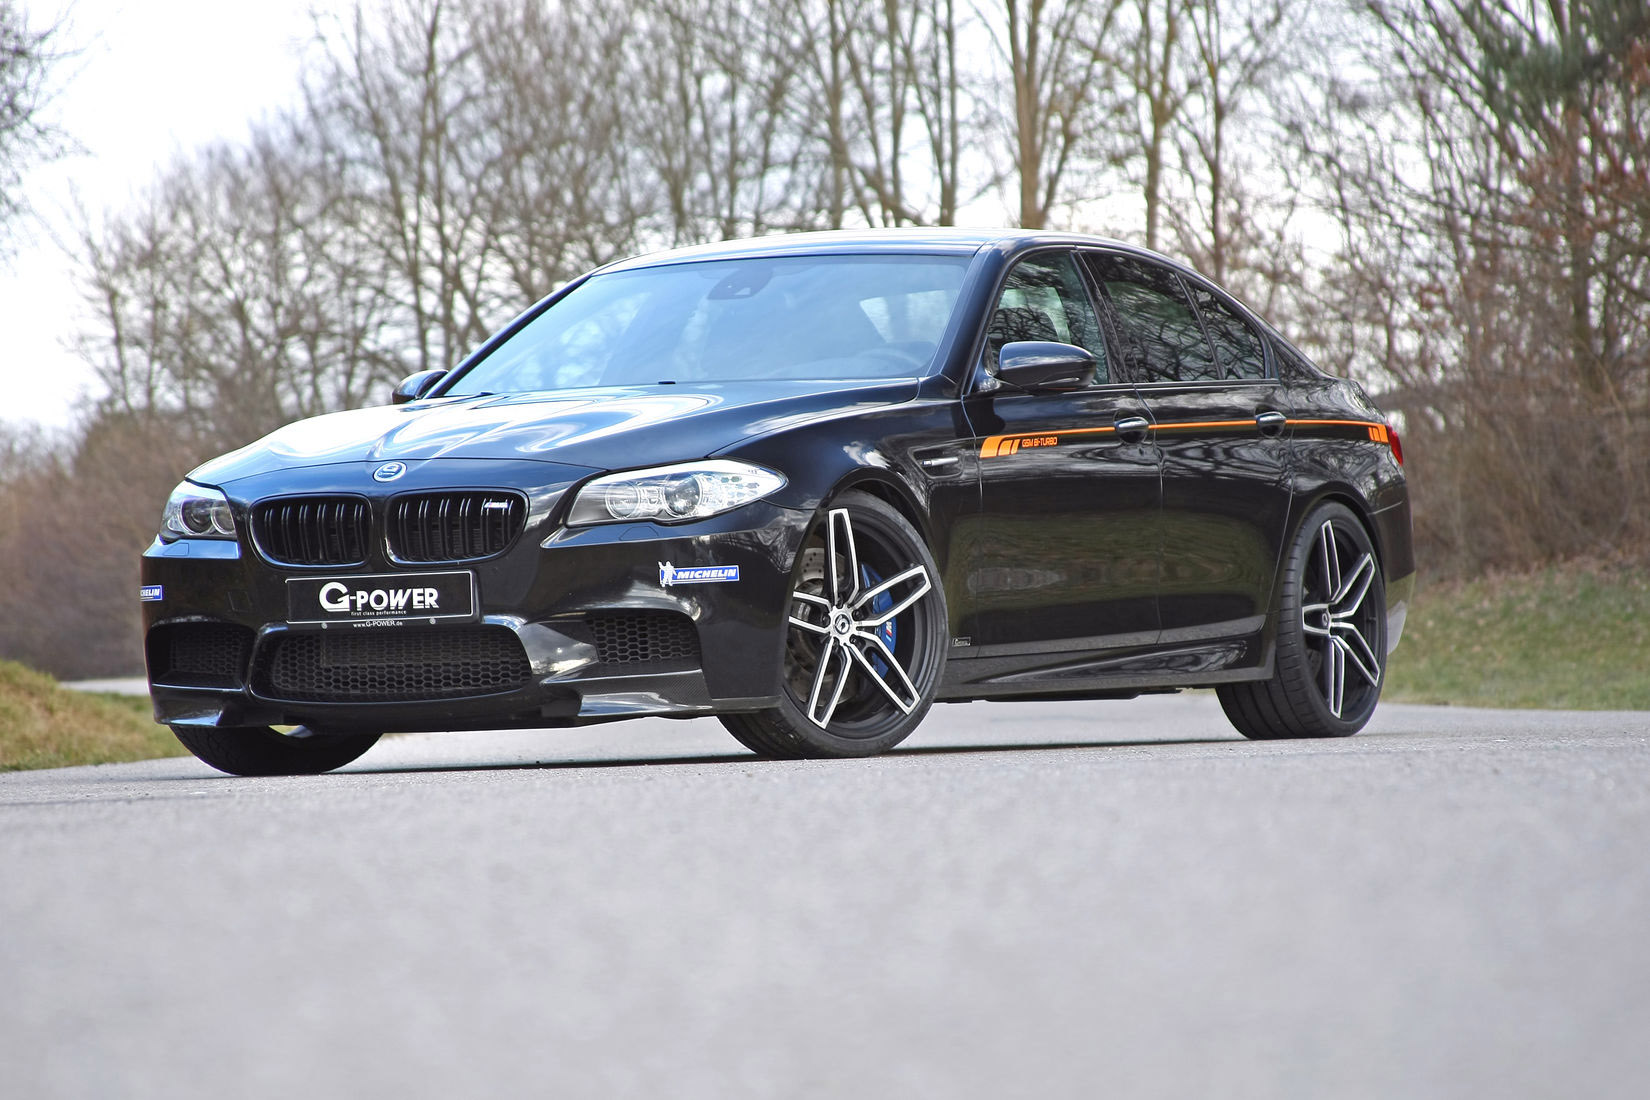 It's time for some Tuning with the G-Power BMW 5-Series!